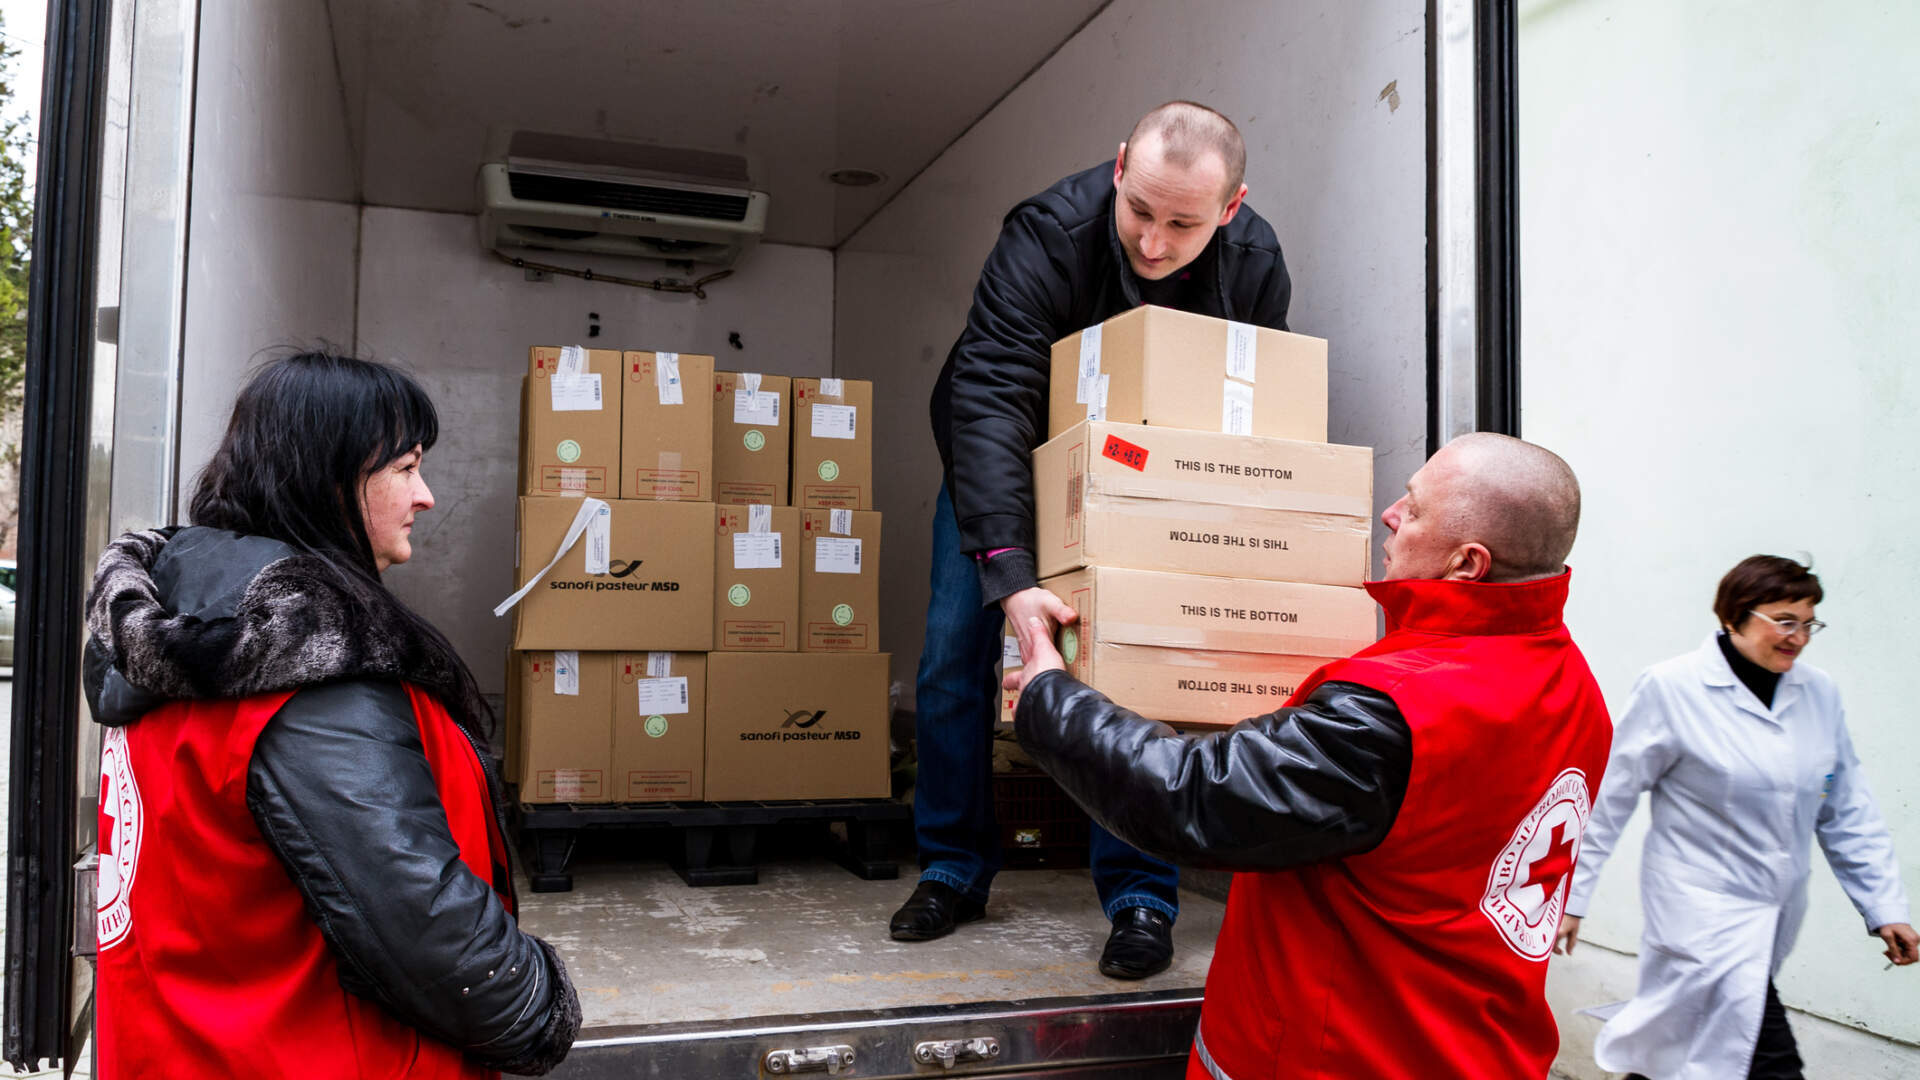 Unshakeable individuals and organizations tackle immense logistical challenges to deliver badly needed aid to Ukrainian civilians and soldiers.